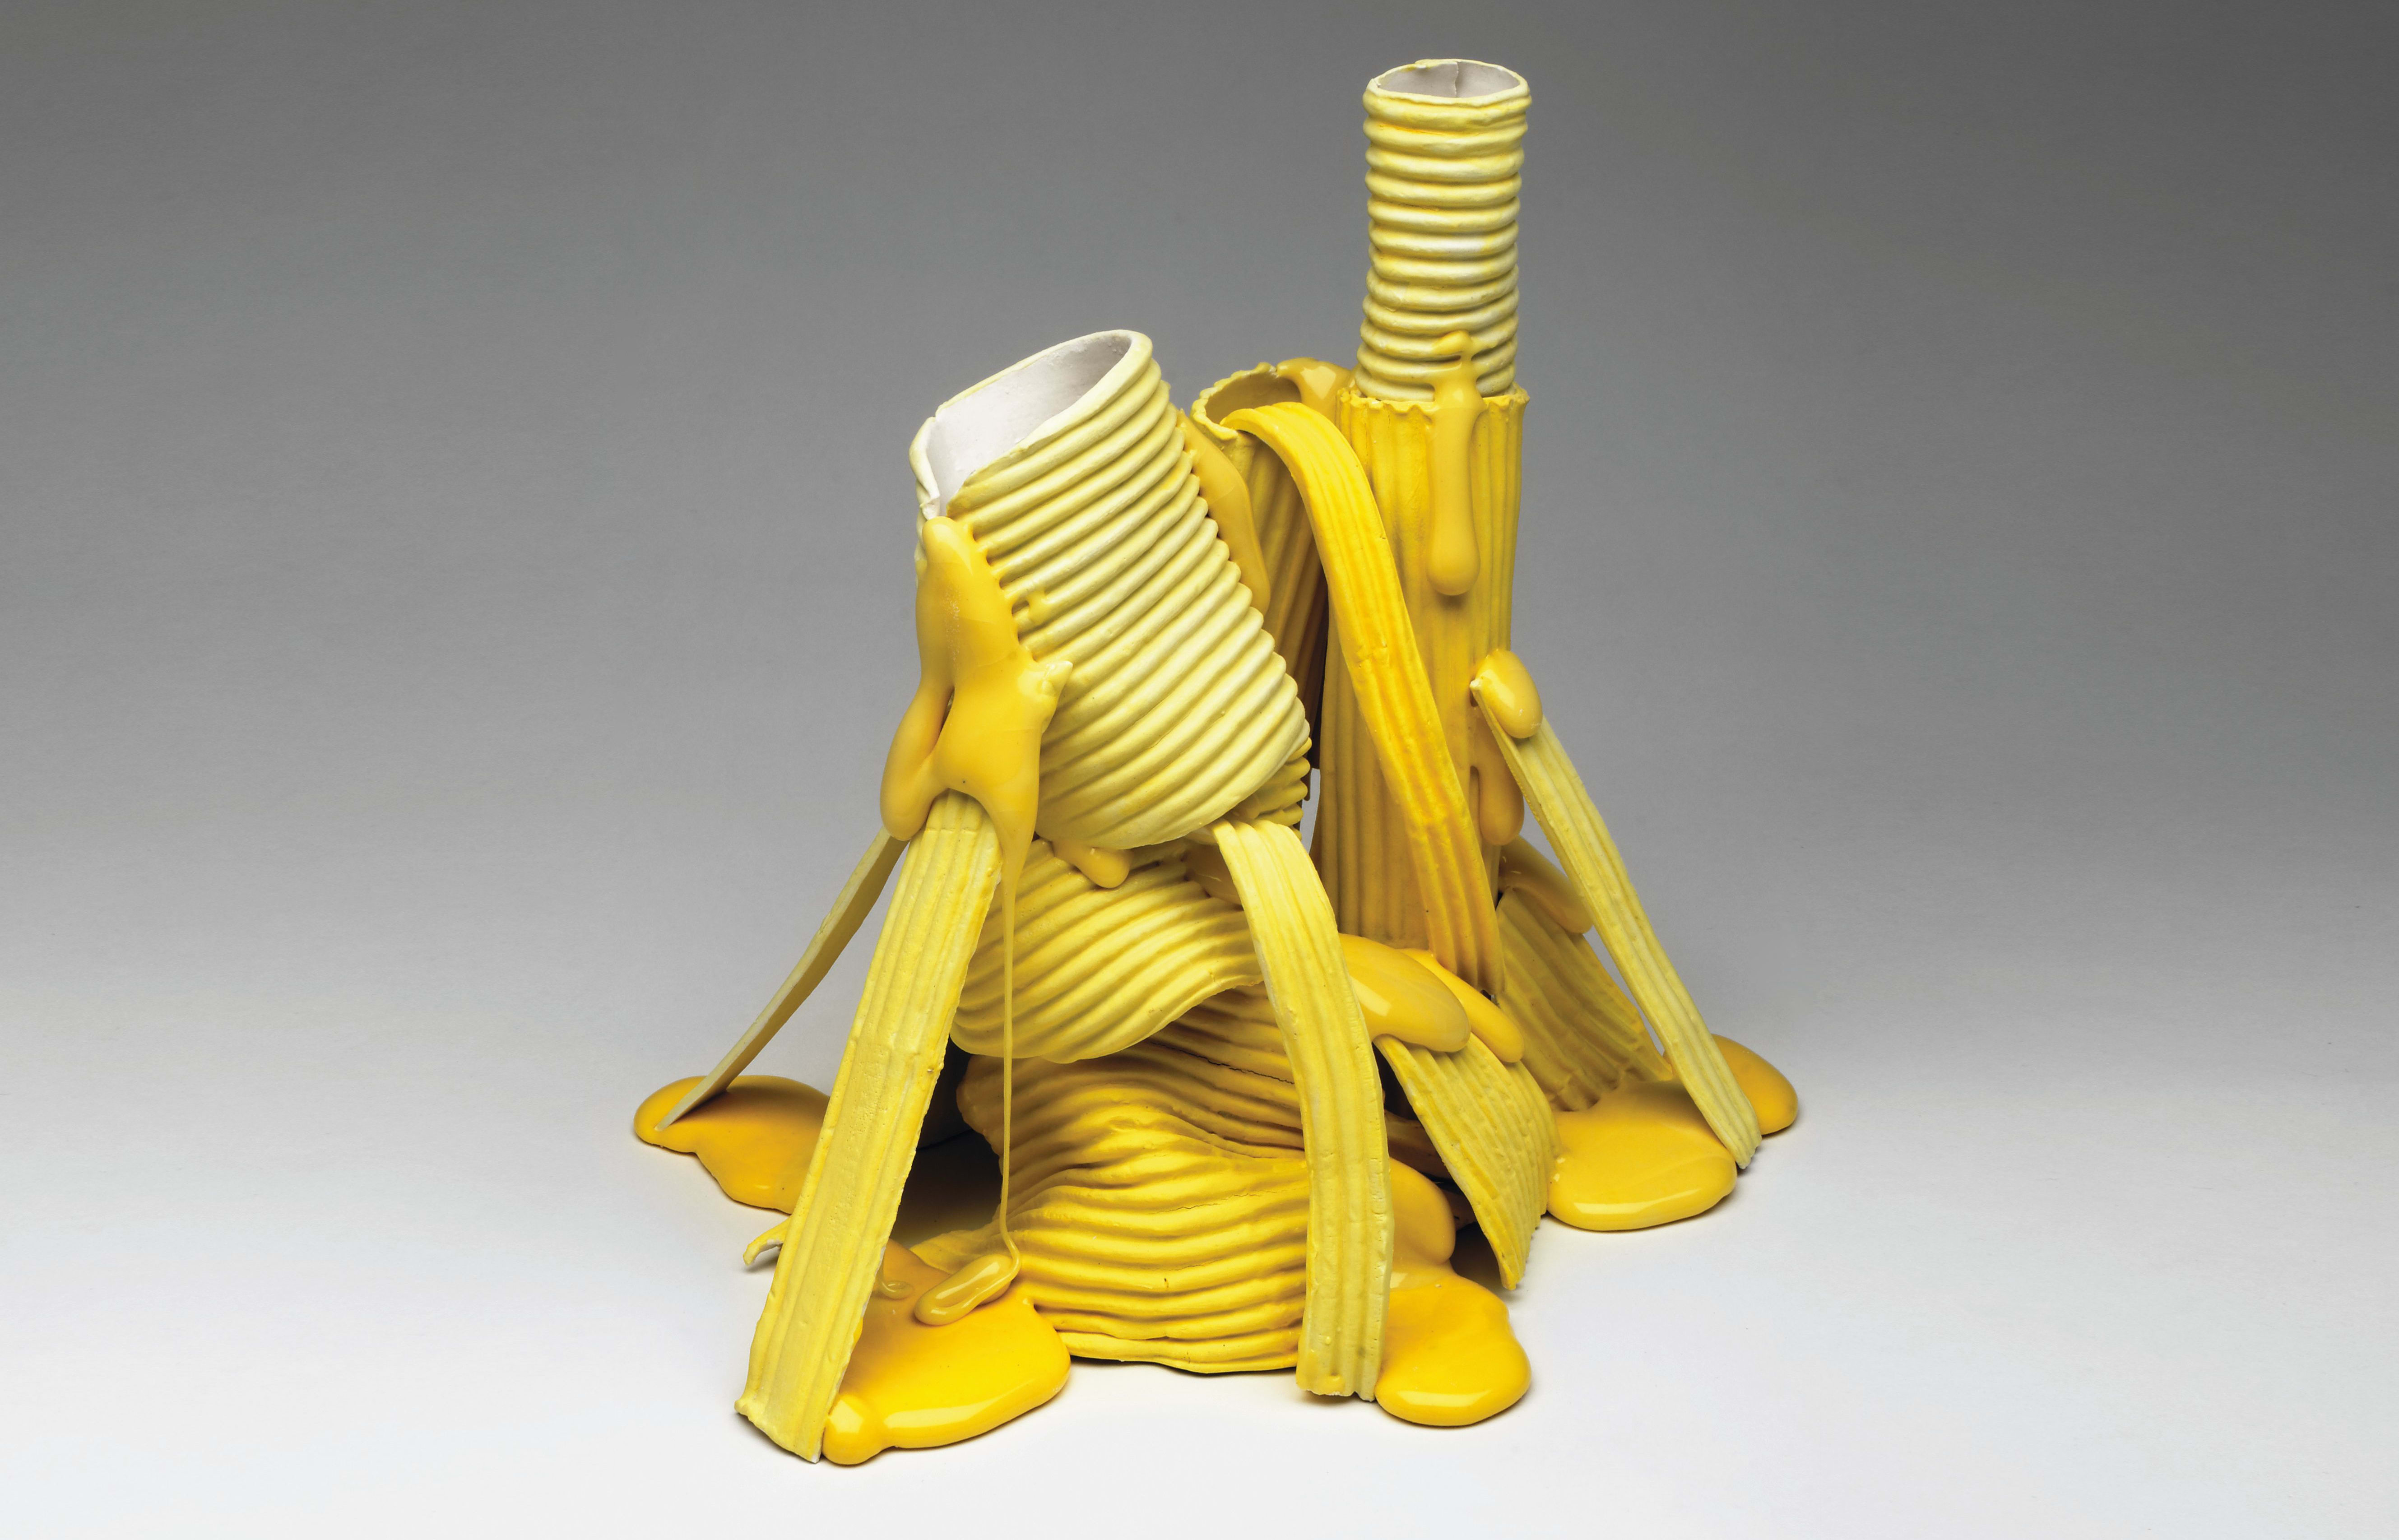 Andrea du Chatenier Untitled (Yellow Stack)